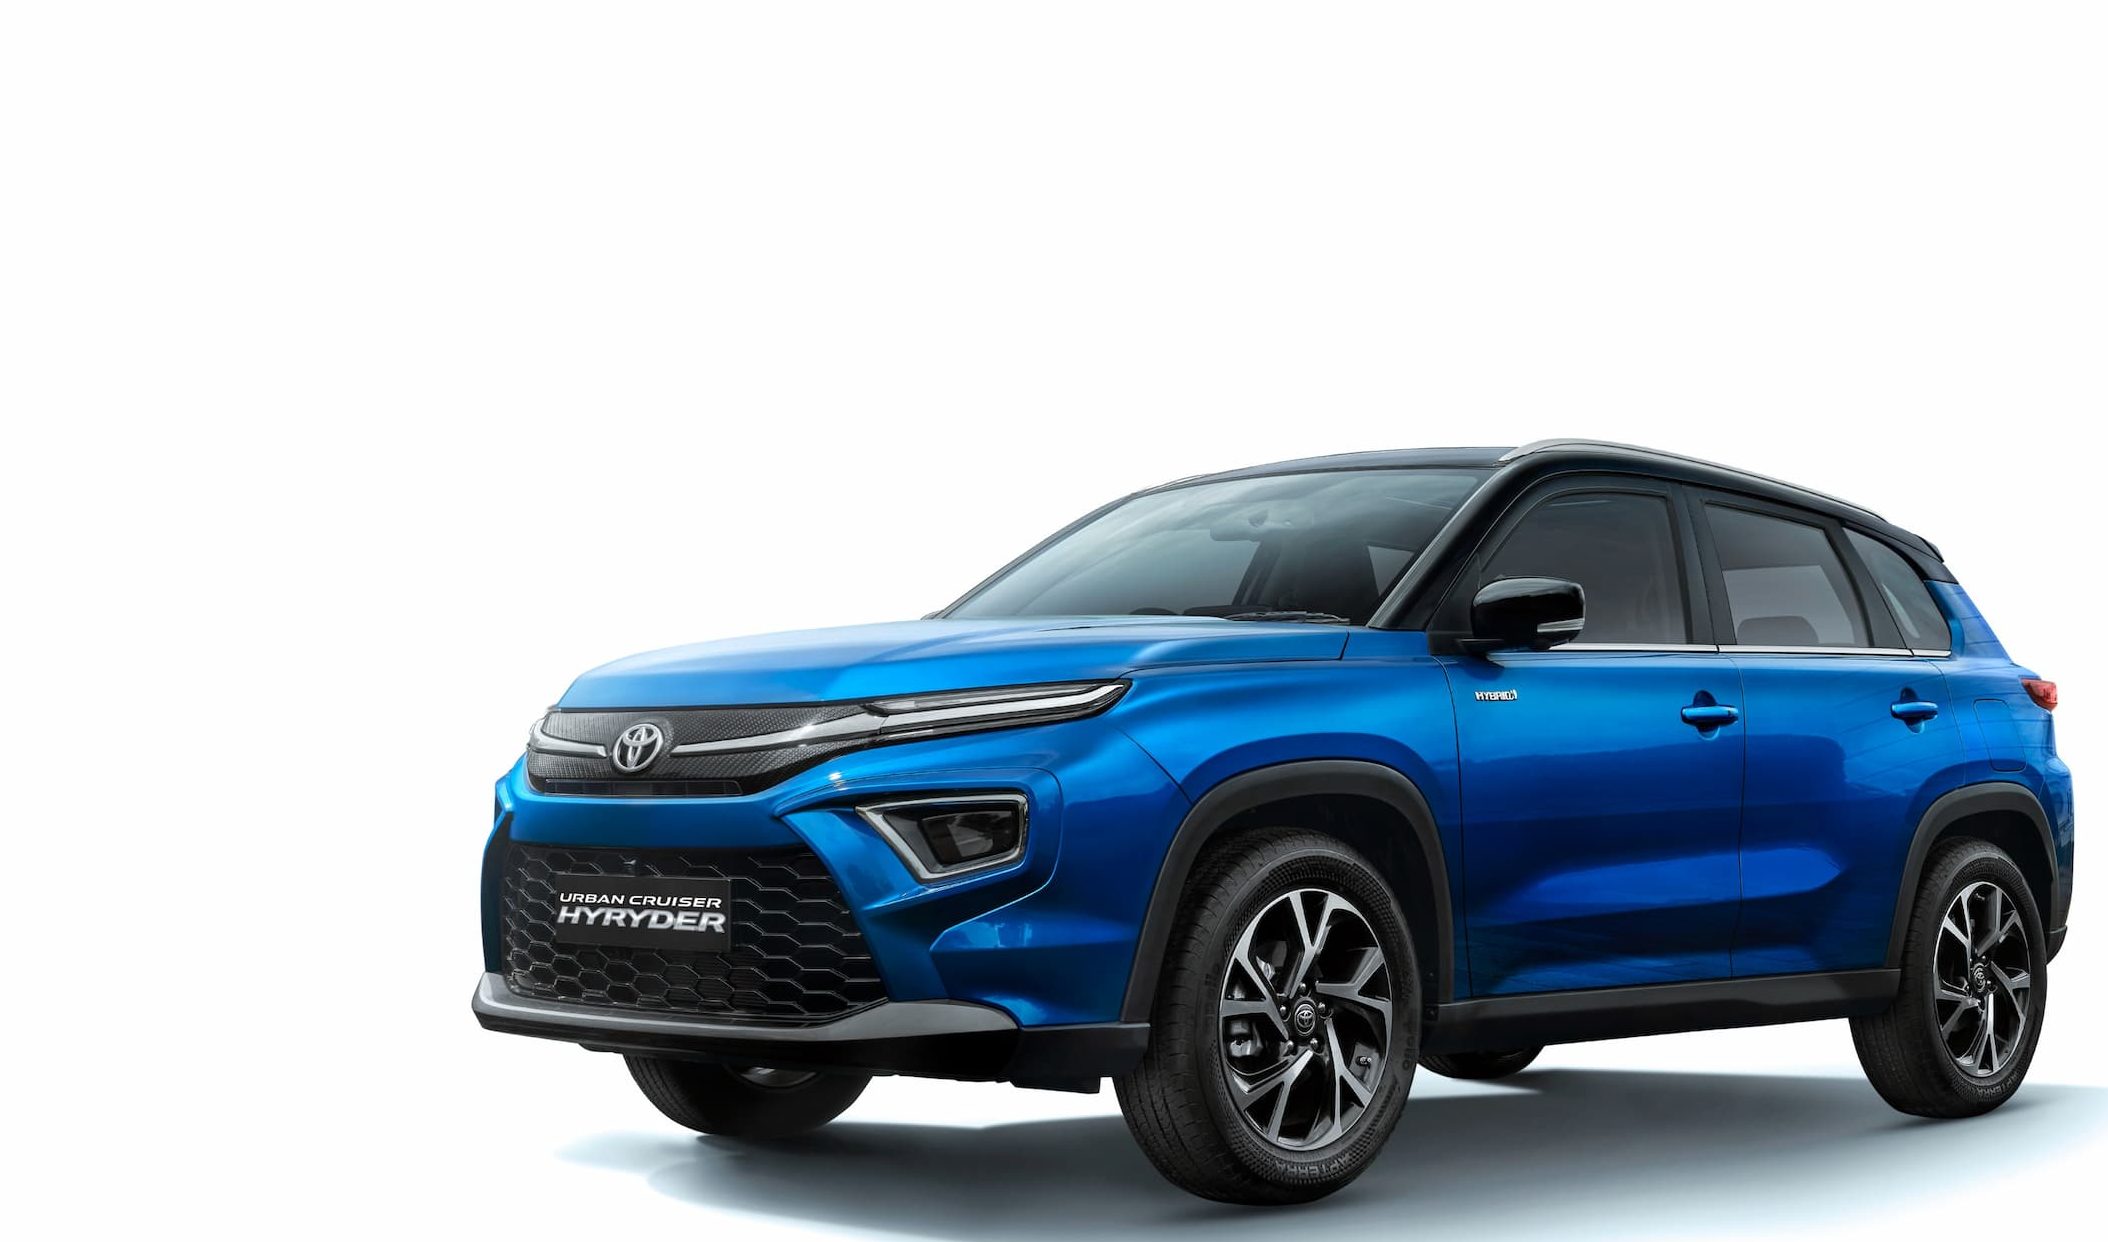 Toyota Hyryder Price announced  Rs 15.11 lakhs to Rs 18.99 lakhs